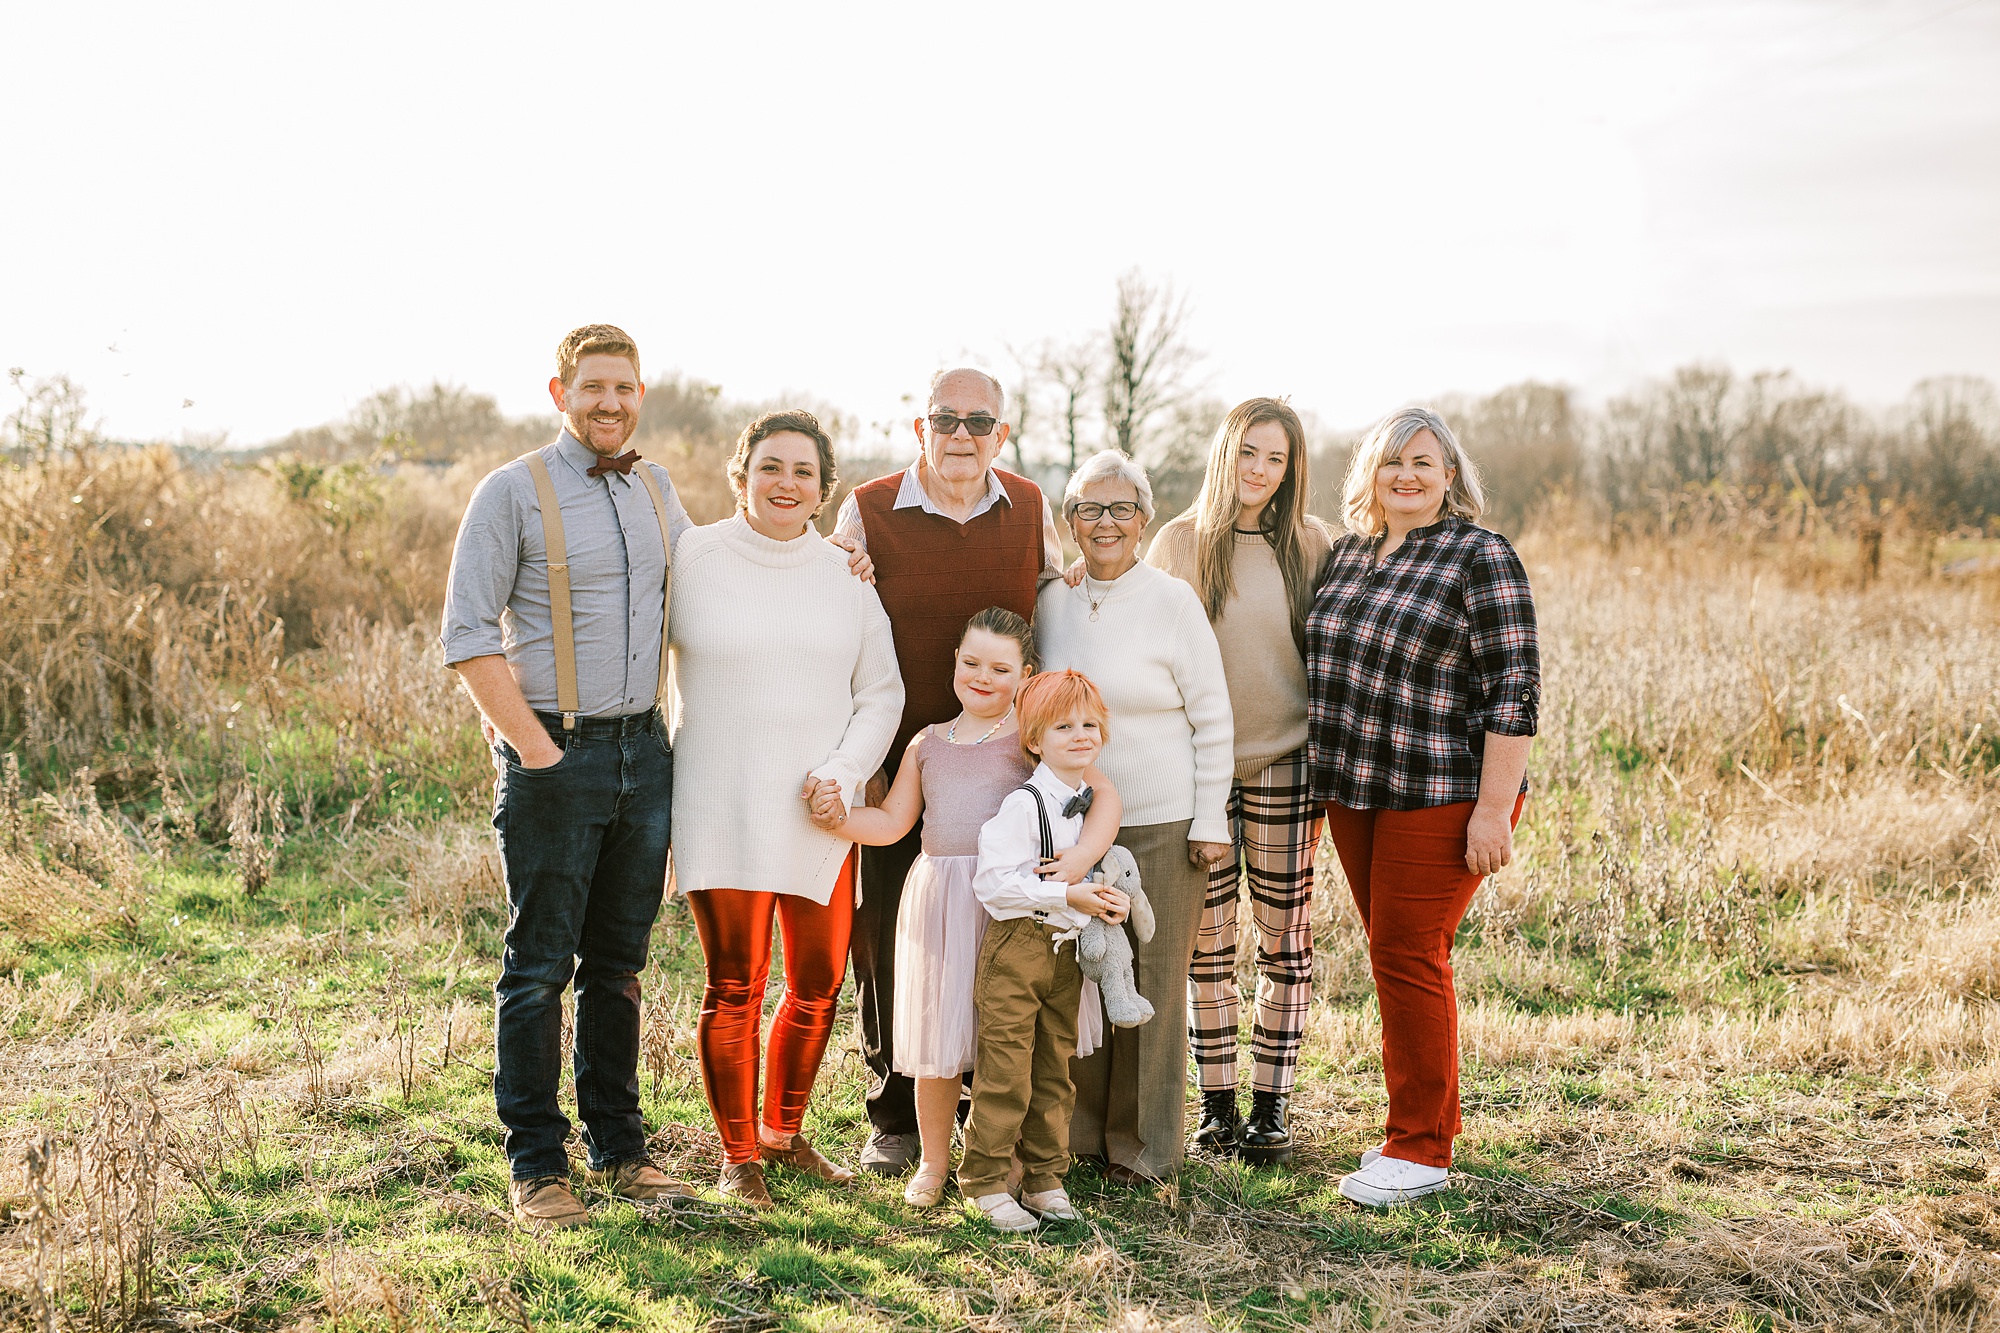 family poses together in field at sunset to celebrate 50th anniversary